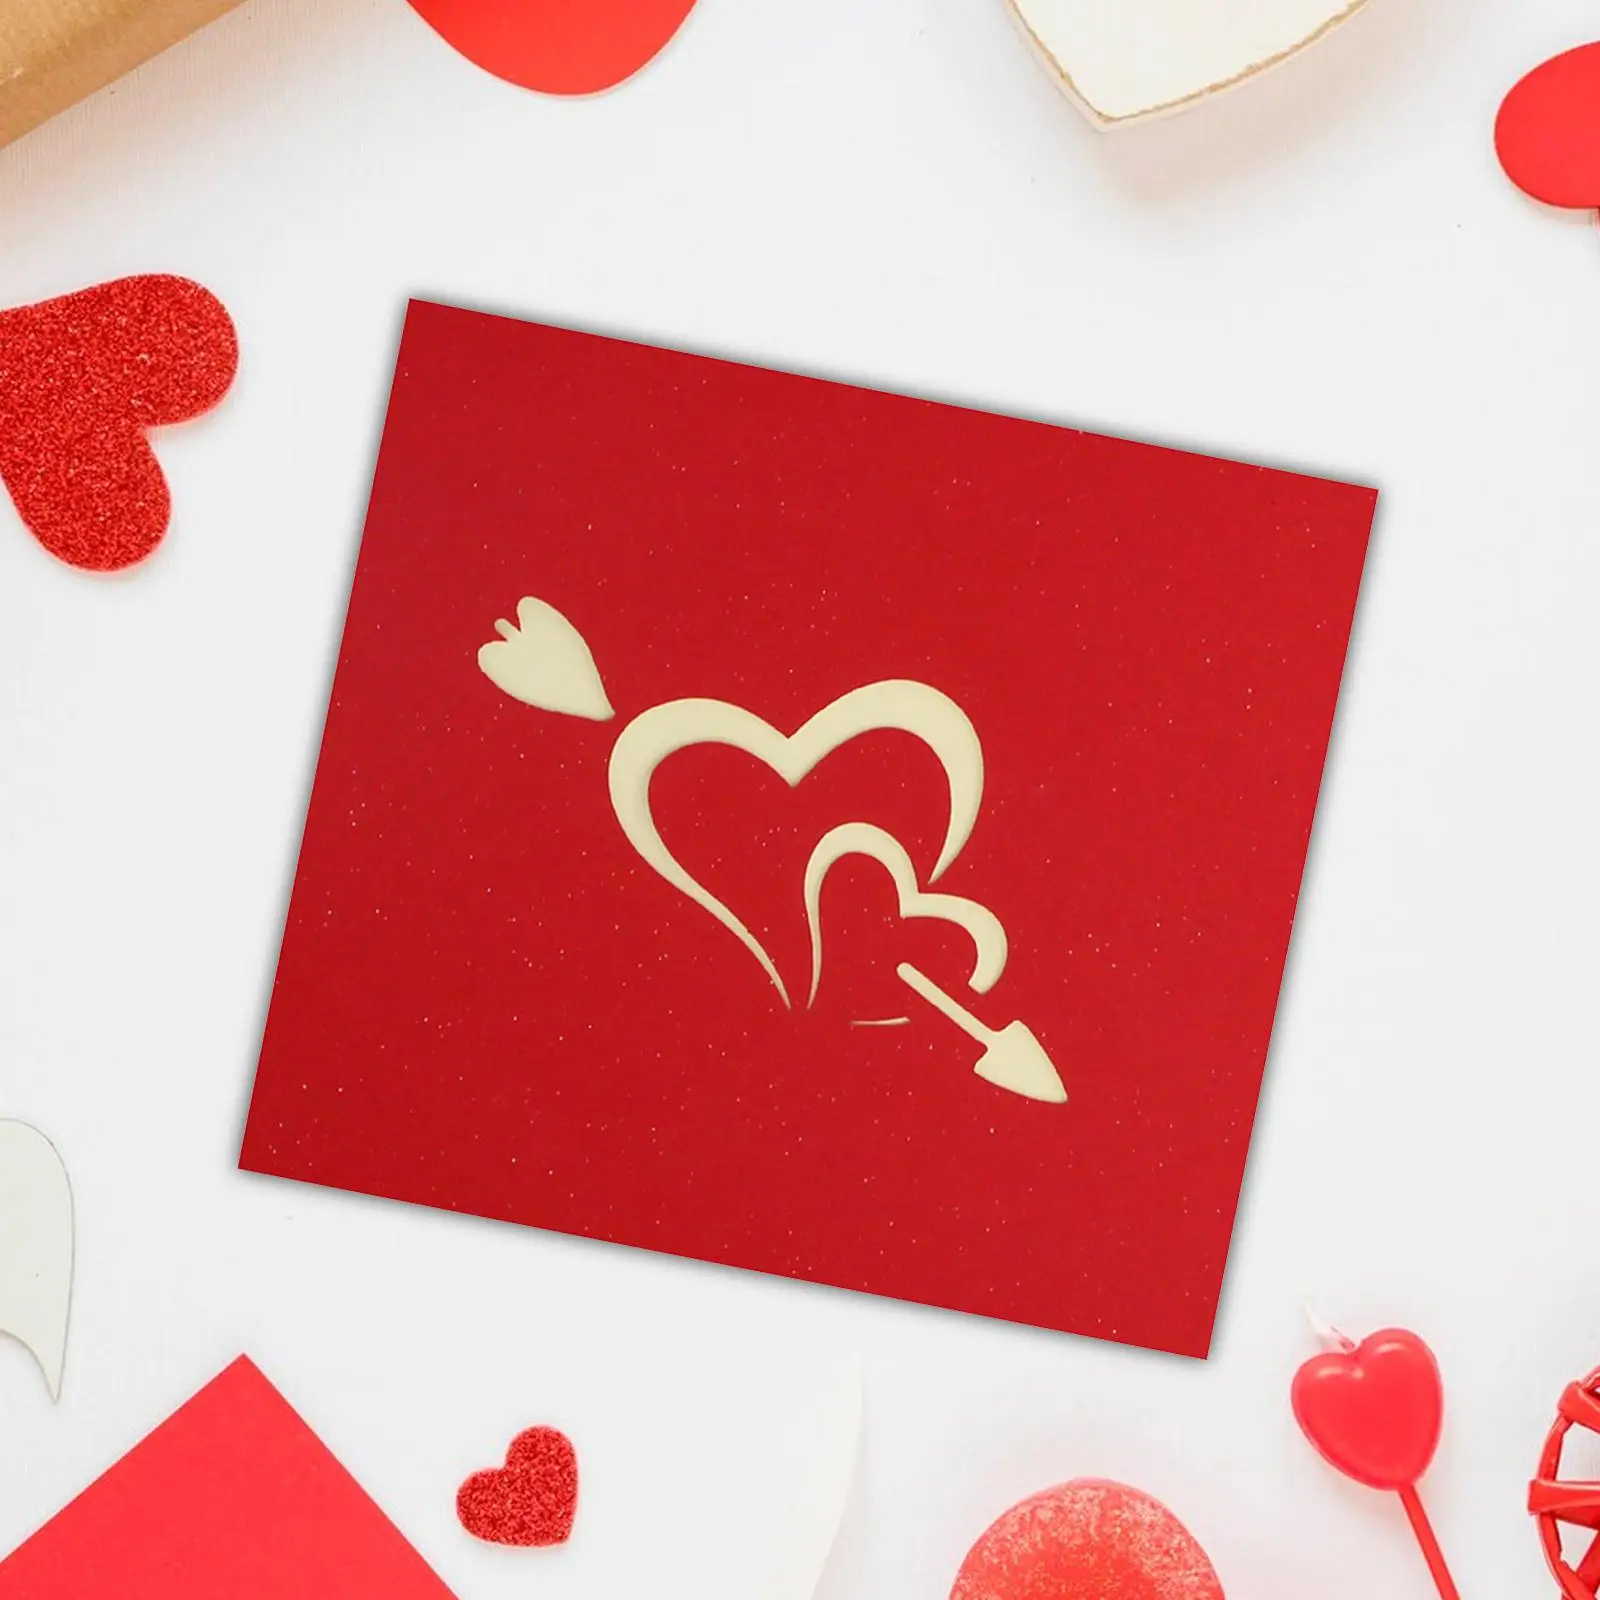 Valentines Day Cards Wedding Card Heart Cupids Invitation Card Anniversary Card with Envelope for Fathers Day Wedding Men Wife